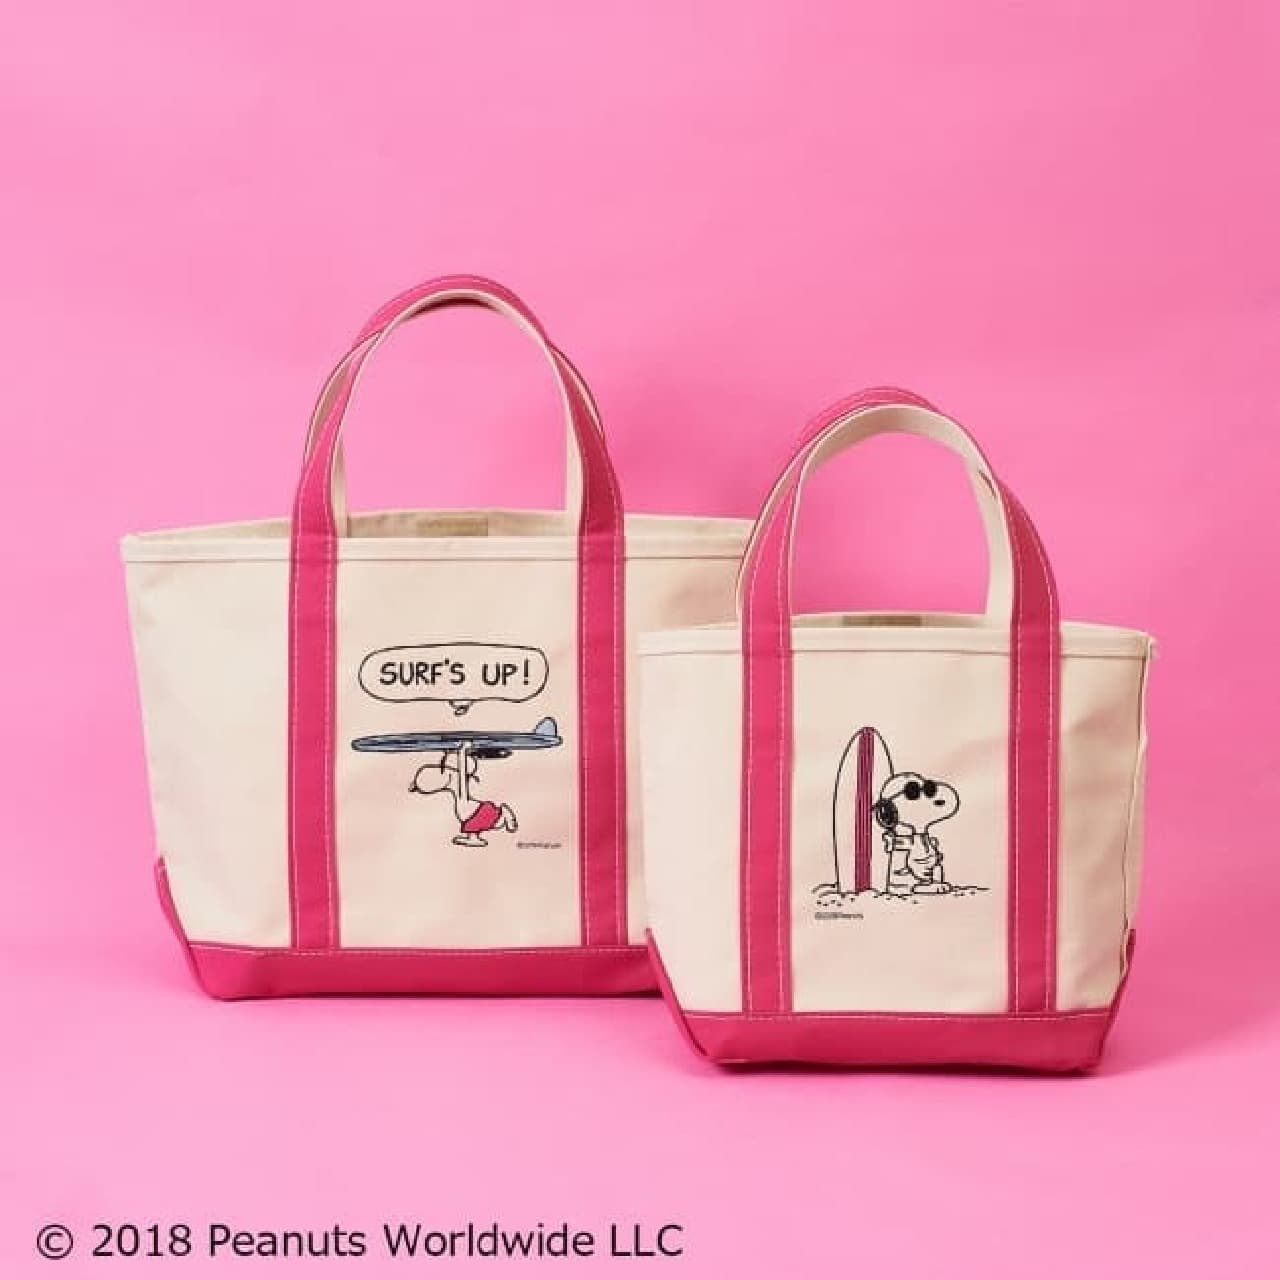 "L.L.Bean" tote bag in collaboration with Snoopy is now in PLAZA